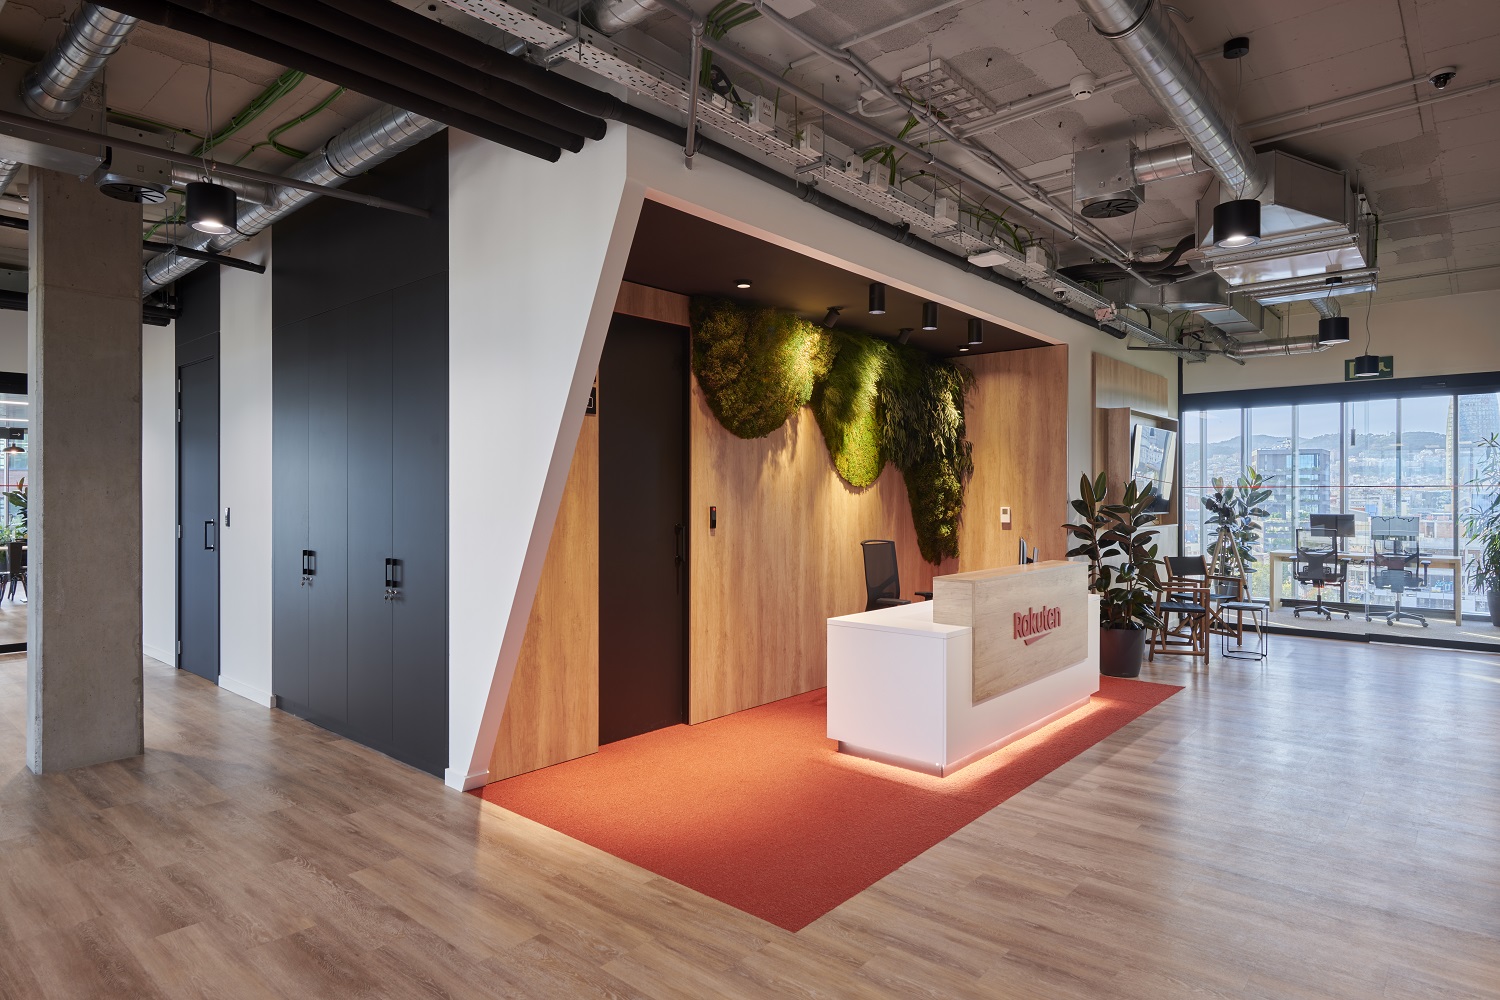 Located in Barcelona, Rakuten TV is a perfect place for team collaboration, where innovation meets sustainability, and employees are the stars of the show.